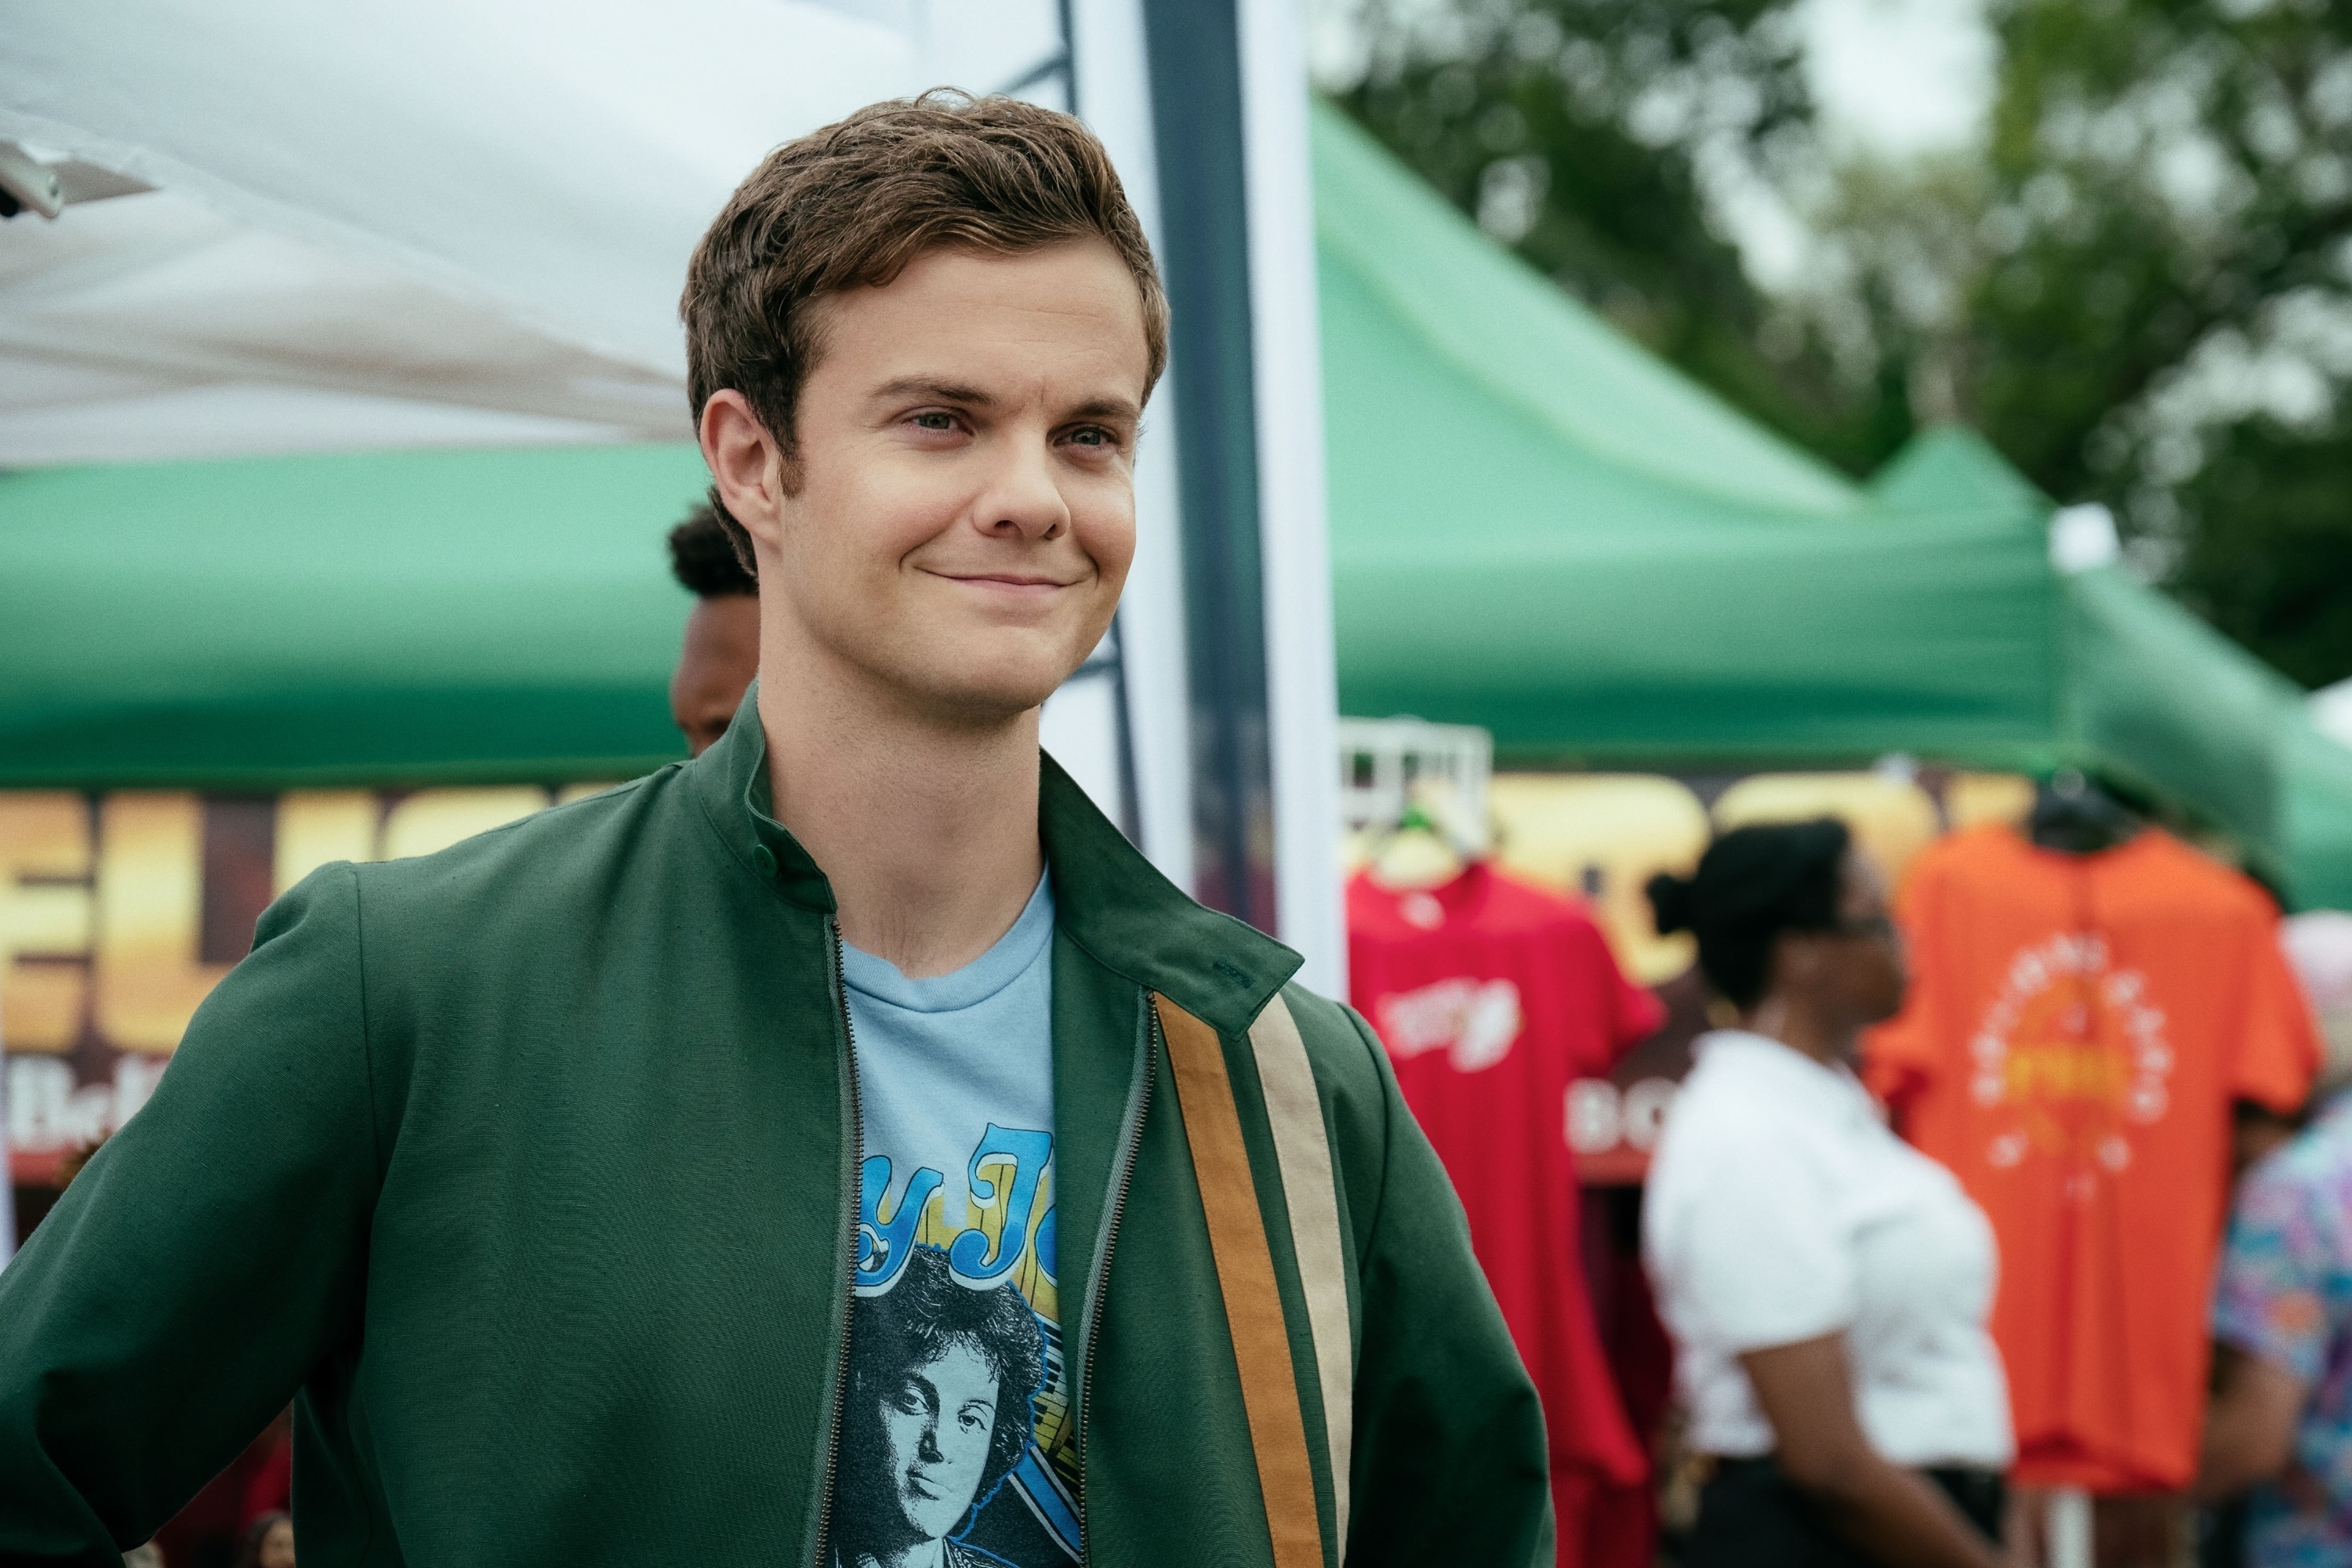 Jack Quaid at an outdoor event, wearing a casual jacket over a graphic T-shirt